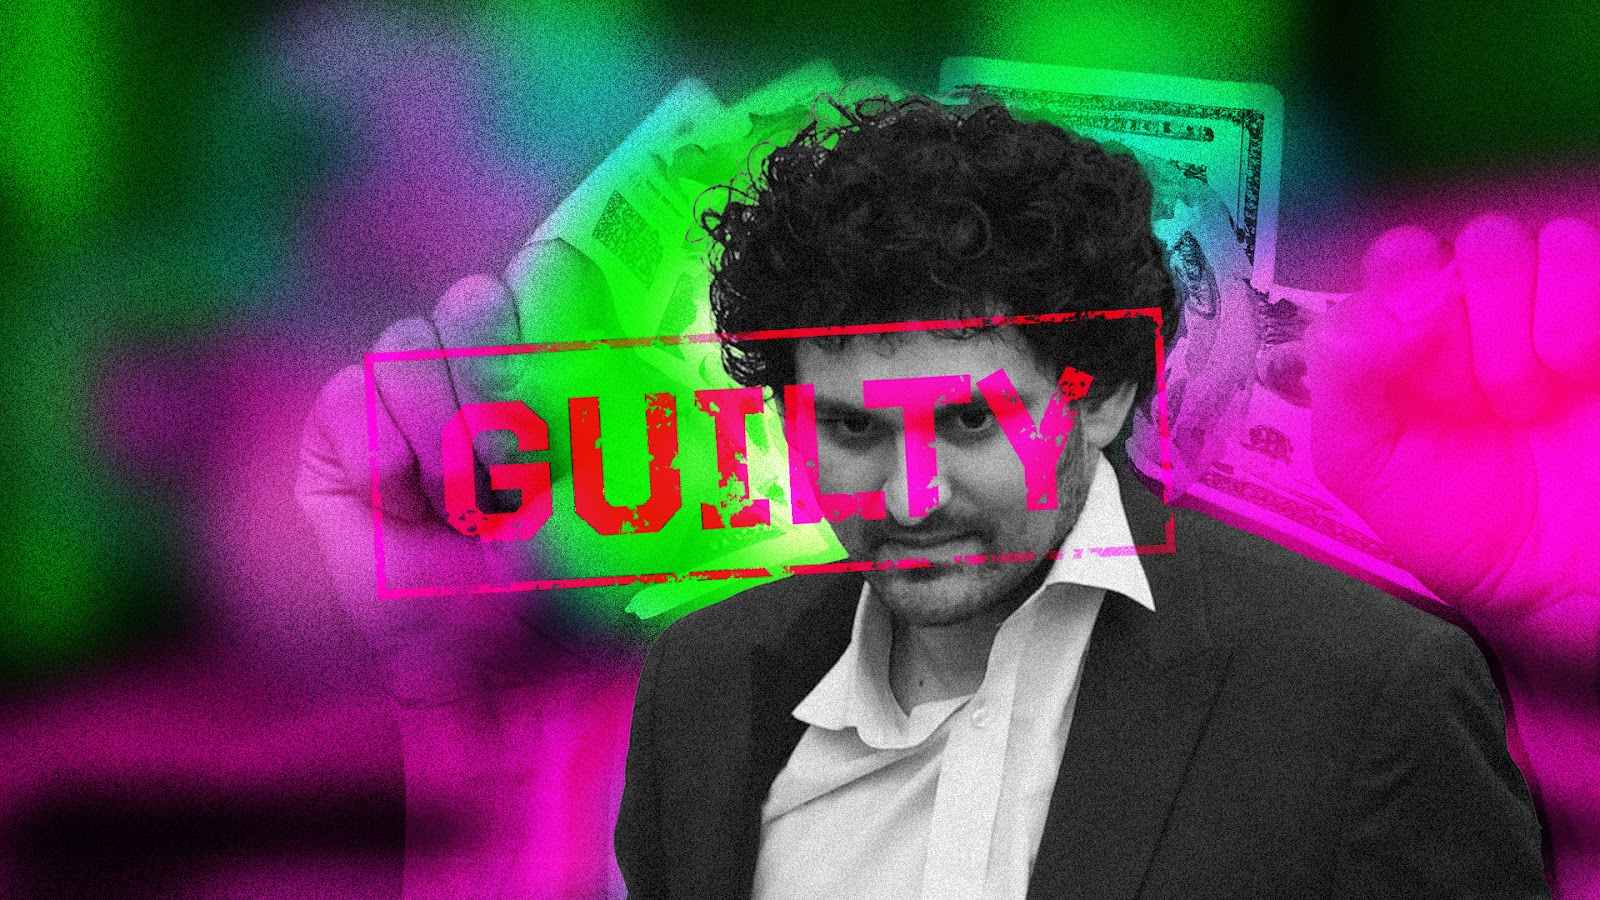 Guilty! - FTX Founder SBF Faces 110 Years Behind Bars